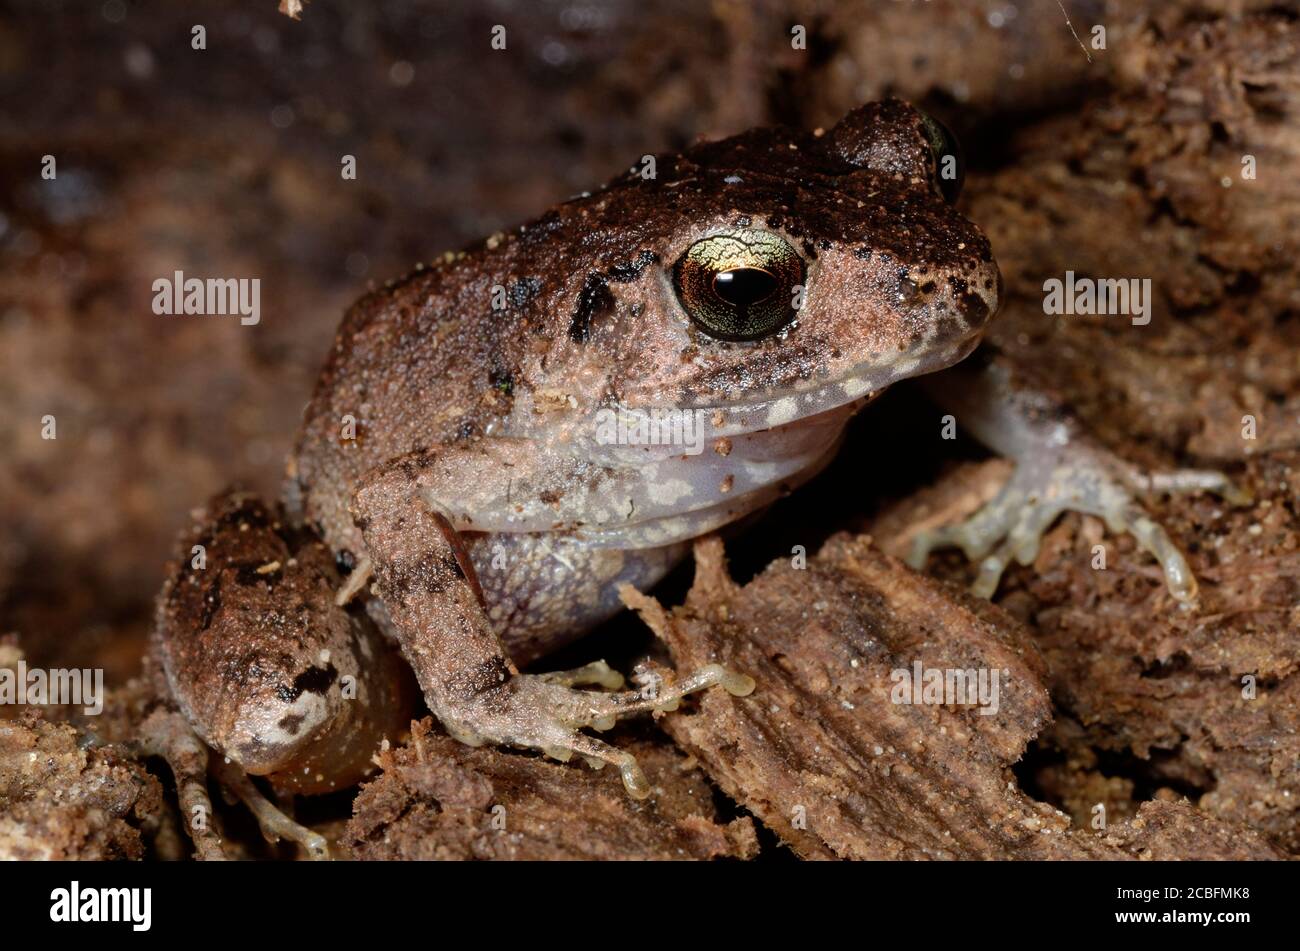 Small toad with golden eyes Stock Photo